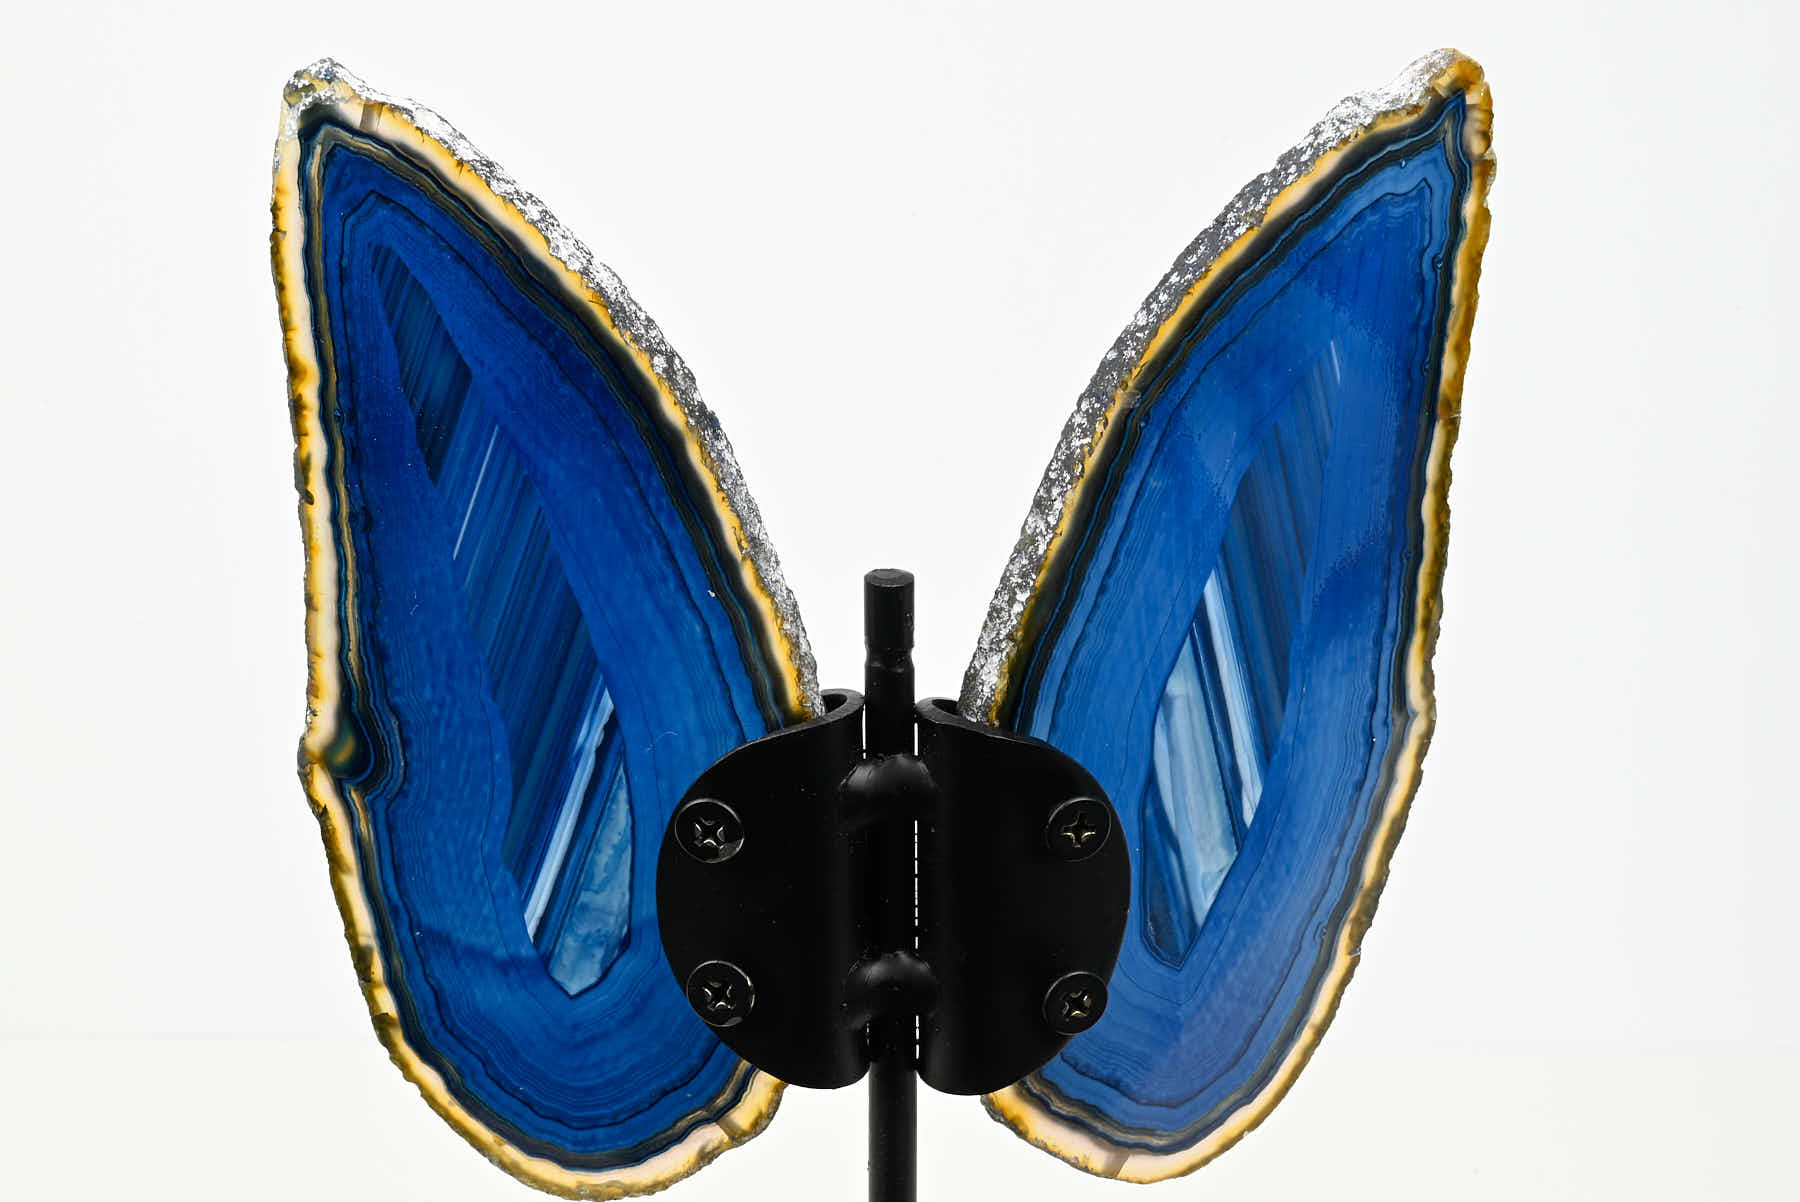 Blue Agate Butterfly on Stand - 0.51kg and 21cm Tall - #BUBLUE-10015